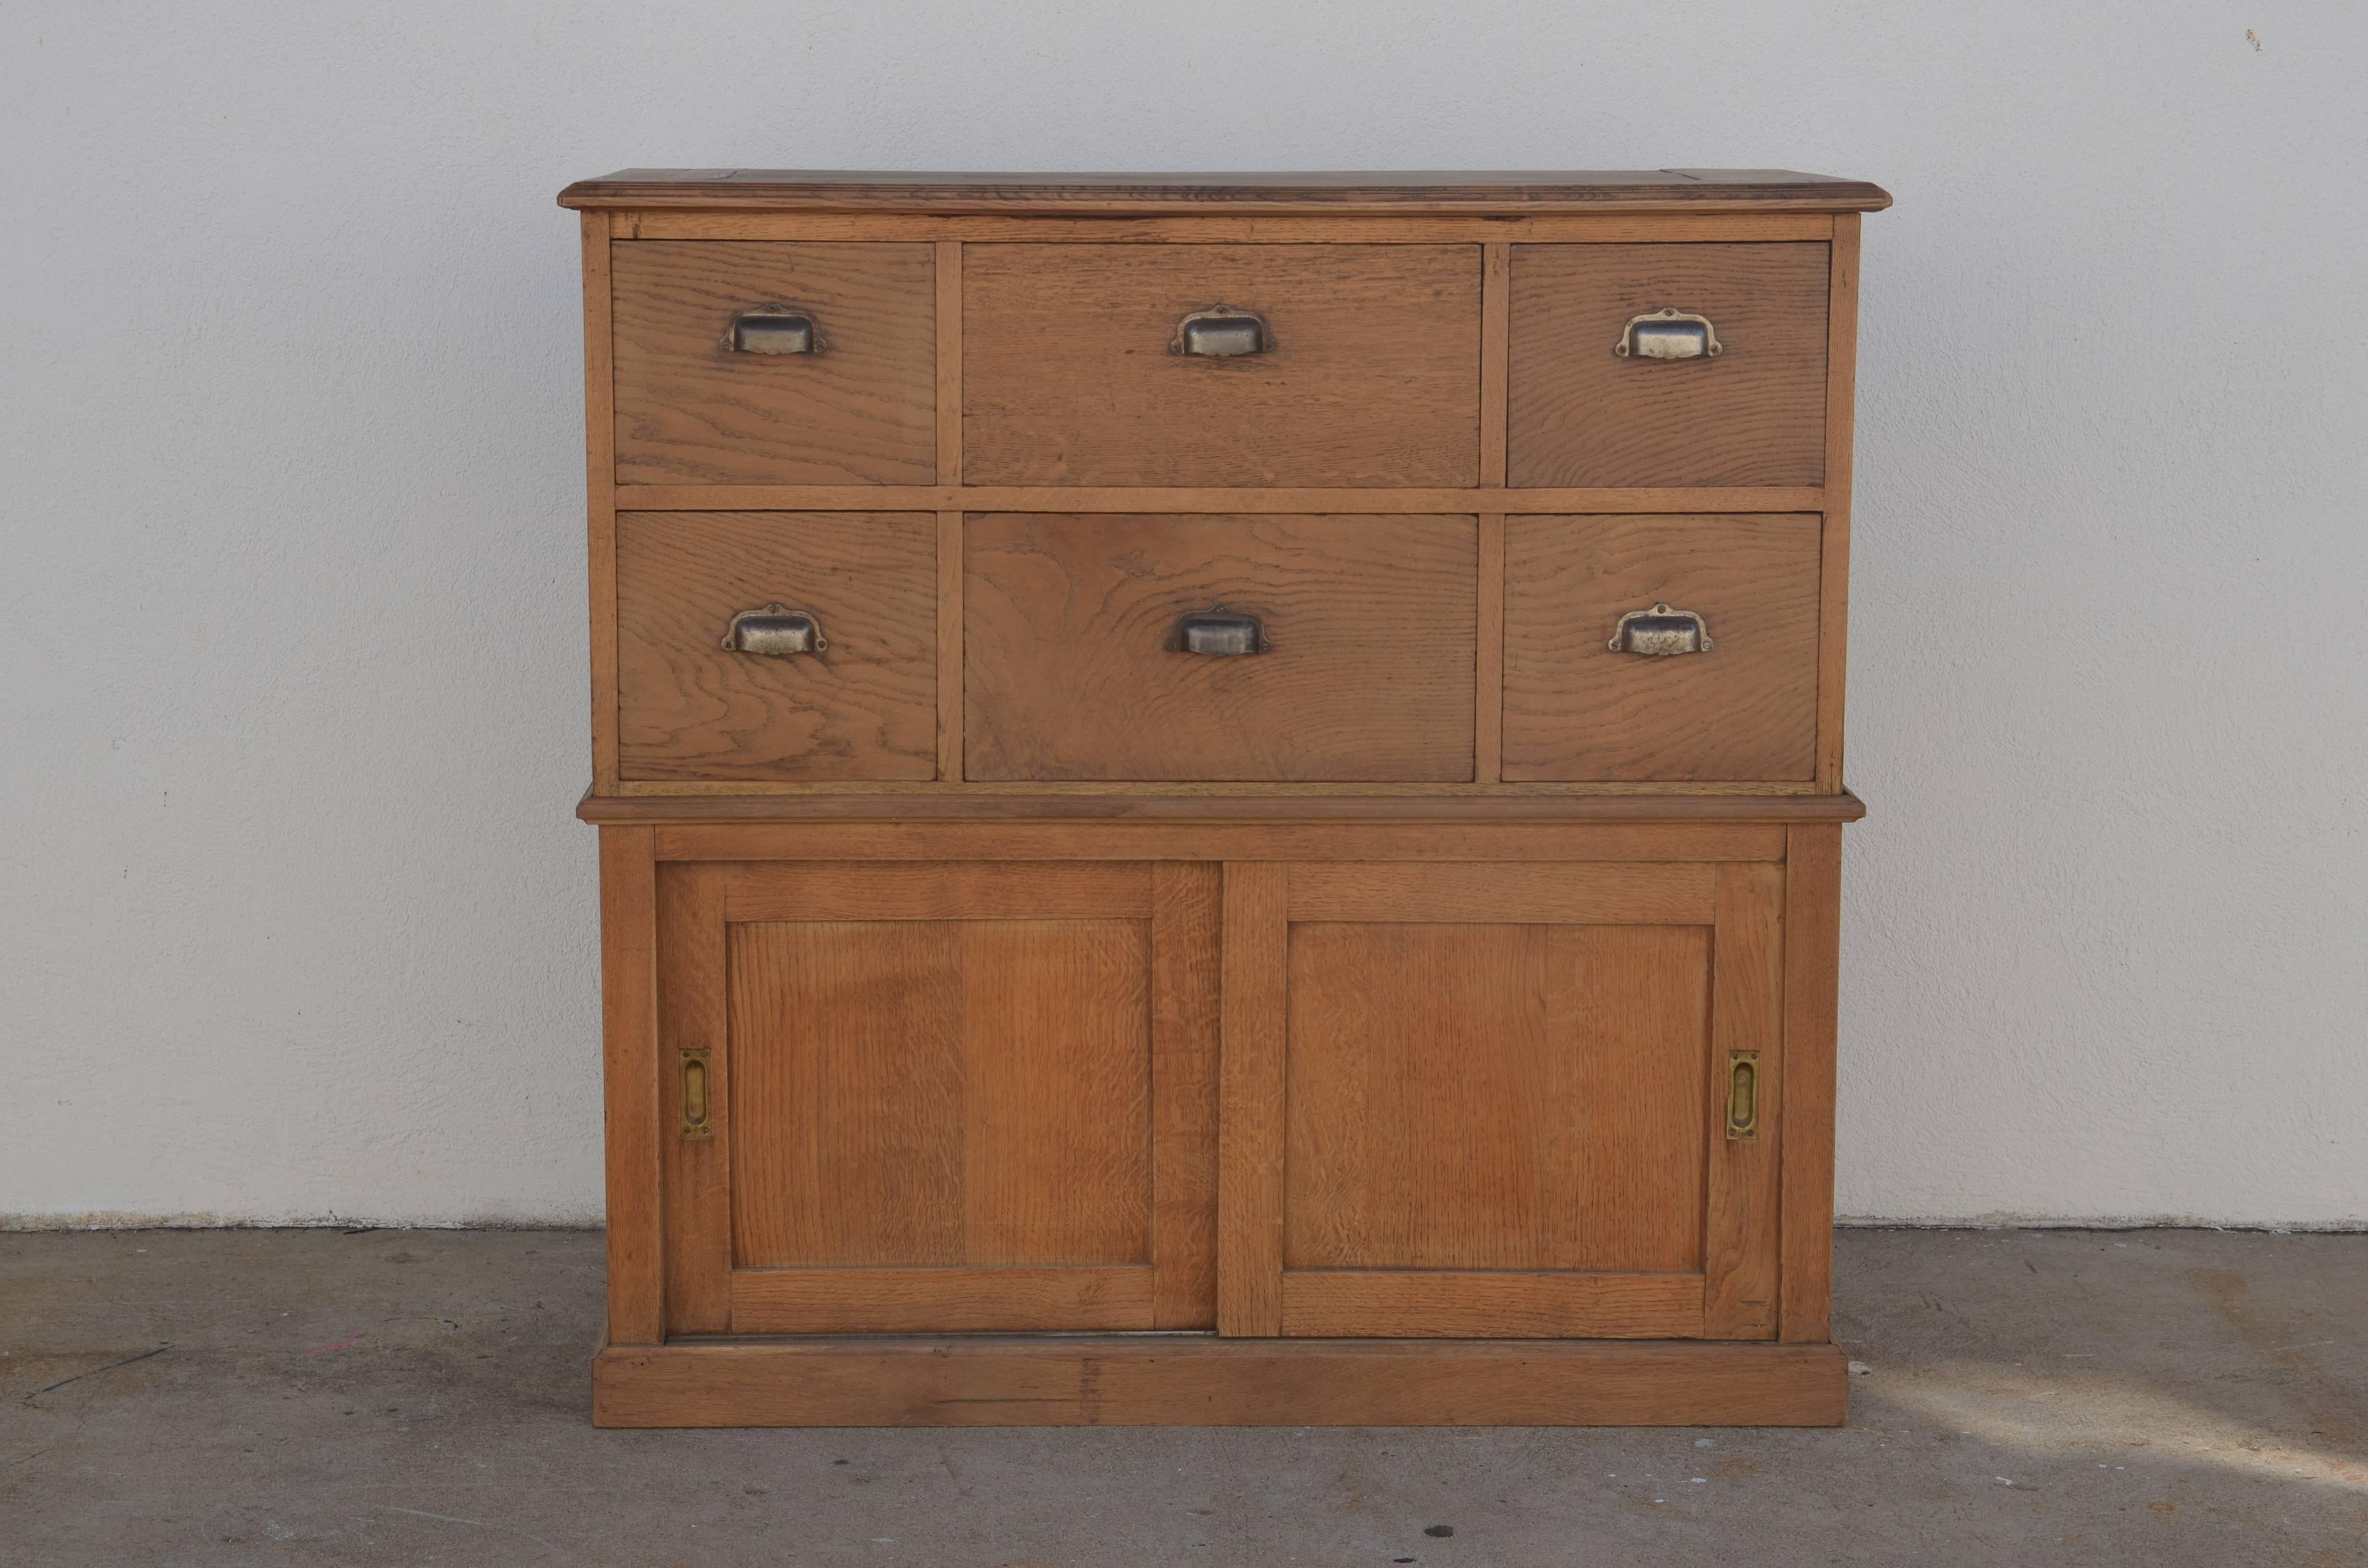 Solid patinated oak French workshop or apothecary cabinet. Original weathered steel hardware. A beautiful, fully functional piece.

Made of two separate parts fitting together.